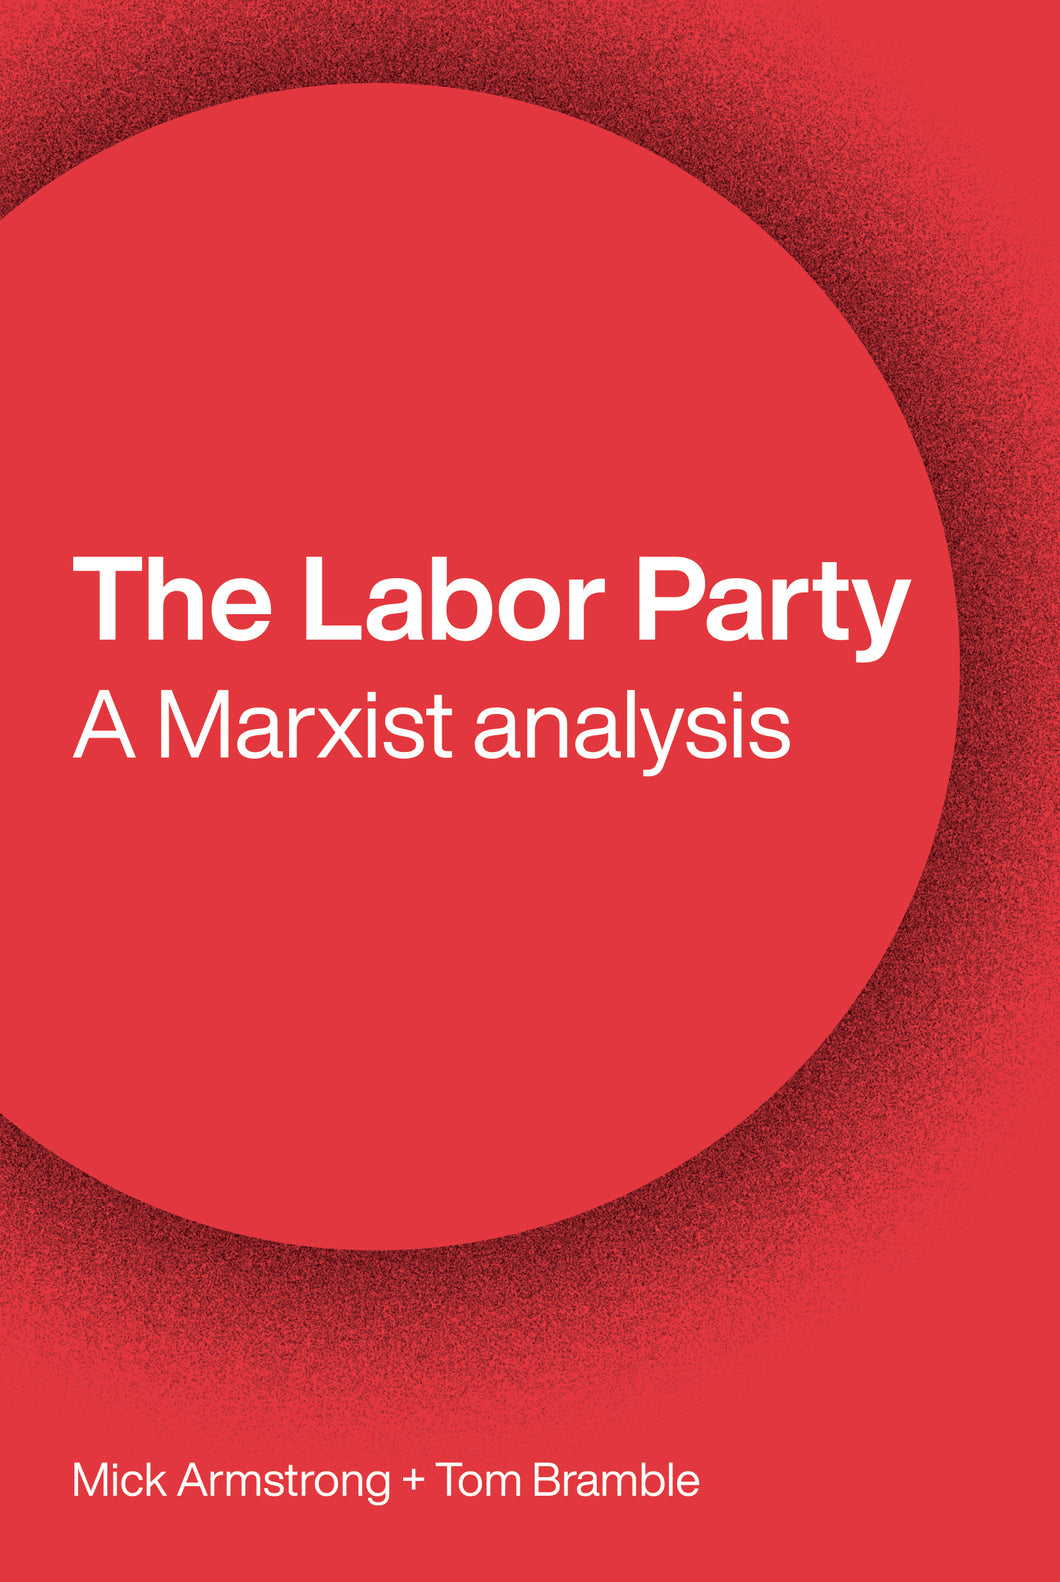 The Labor Party: A Marxist analysis